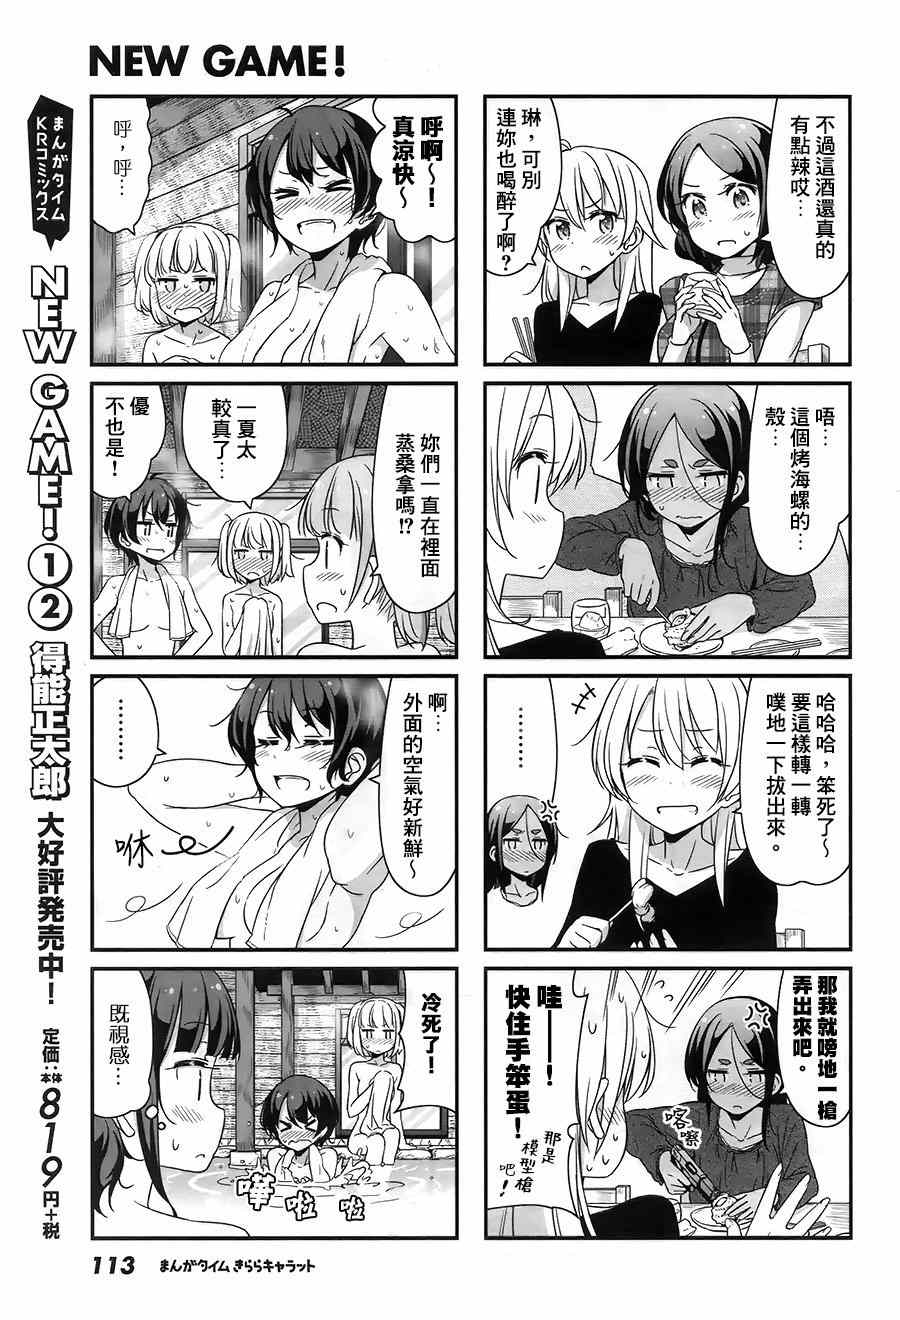 《New Game!》漫画 New Game 029集